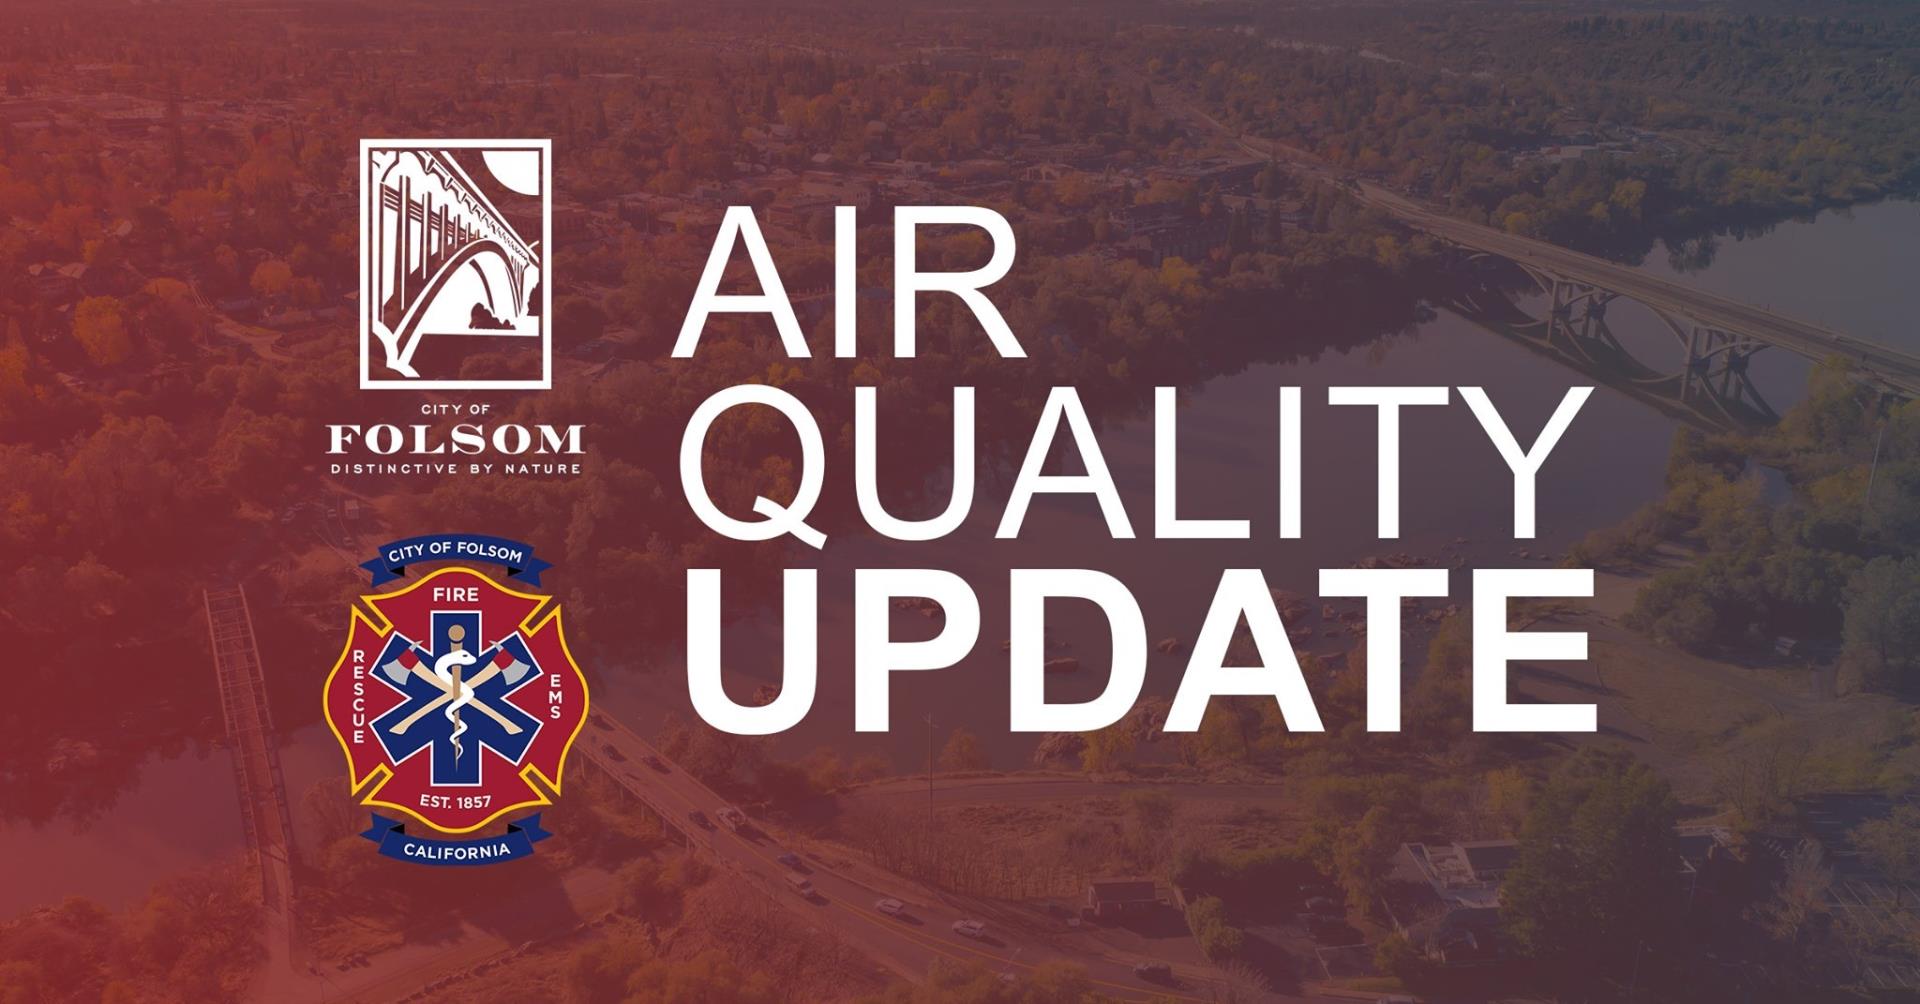 City of Folsom Air Quality Update Graphic with bird's eye/overhead shot of Folsom rivers/bridges/neighborhood/trees with a red overlay and white logo and text City of Folsom fire dept. logo